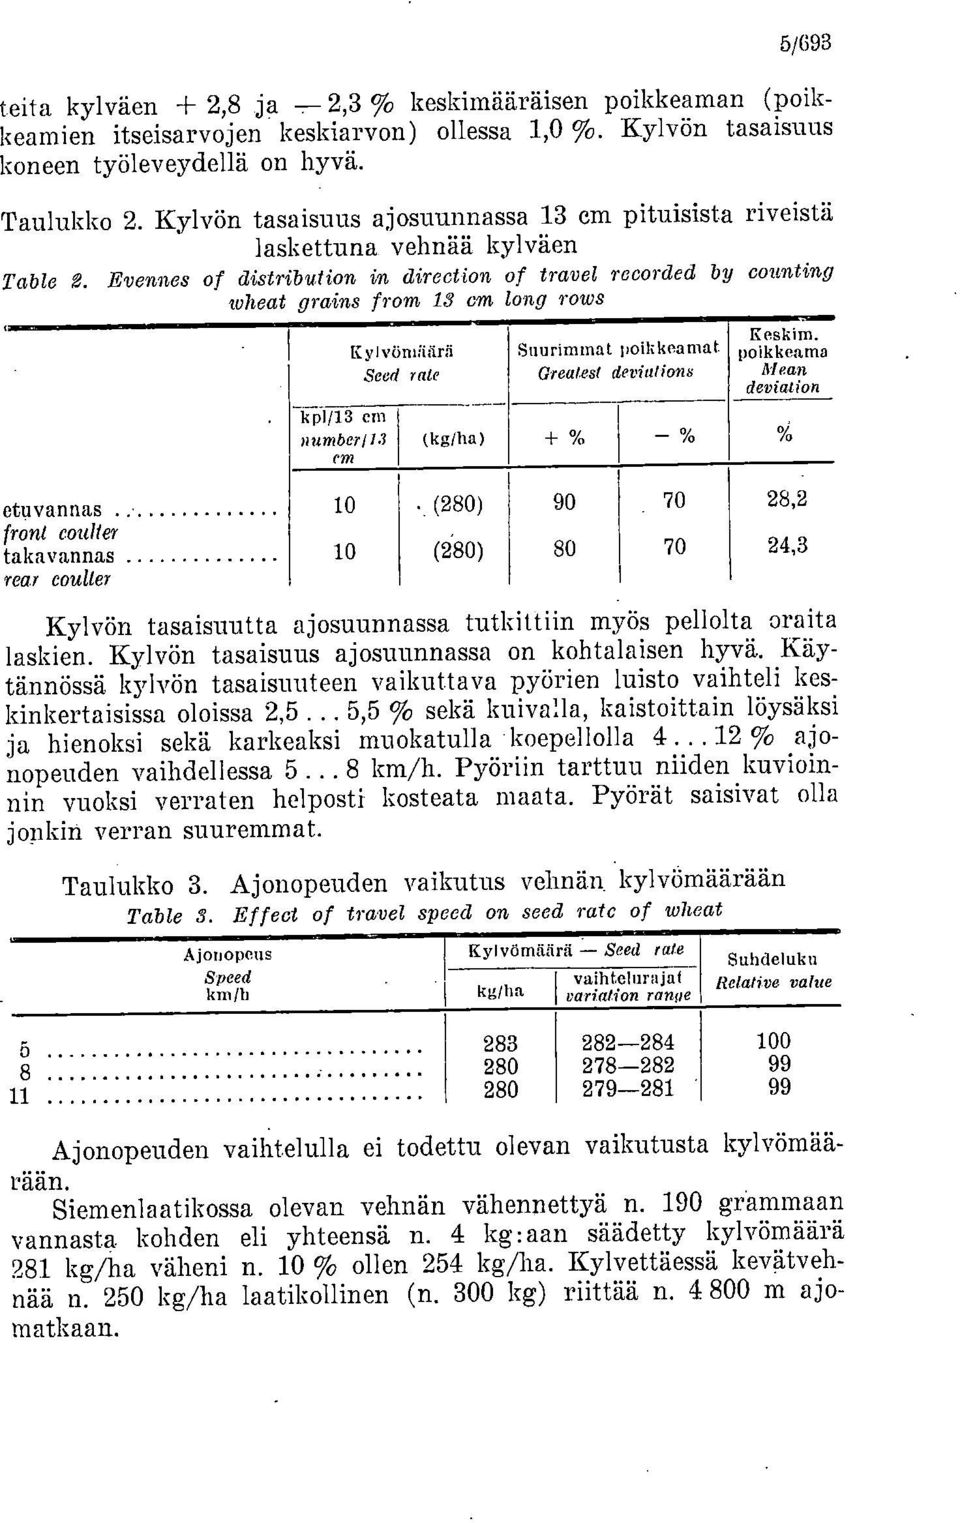 Evennes of distribution in direction of travel recorded by counting wheat grains from 13 cm long rows kp1/13 cm number113 cm Kylvtinifitirti Seed rale () Suurimmat poikkeamat Greatest deriations +% %